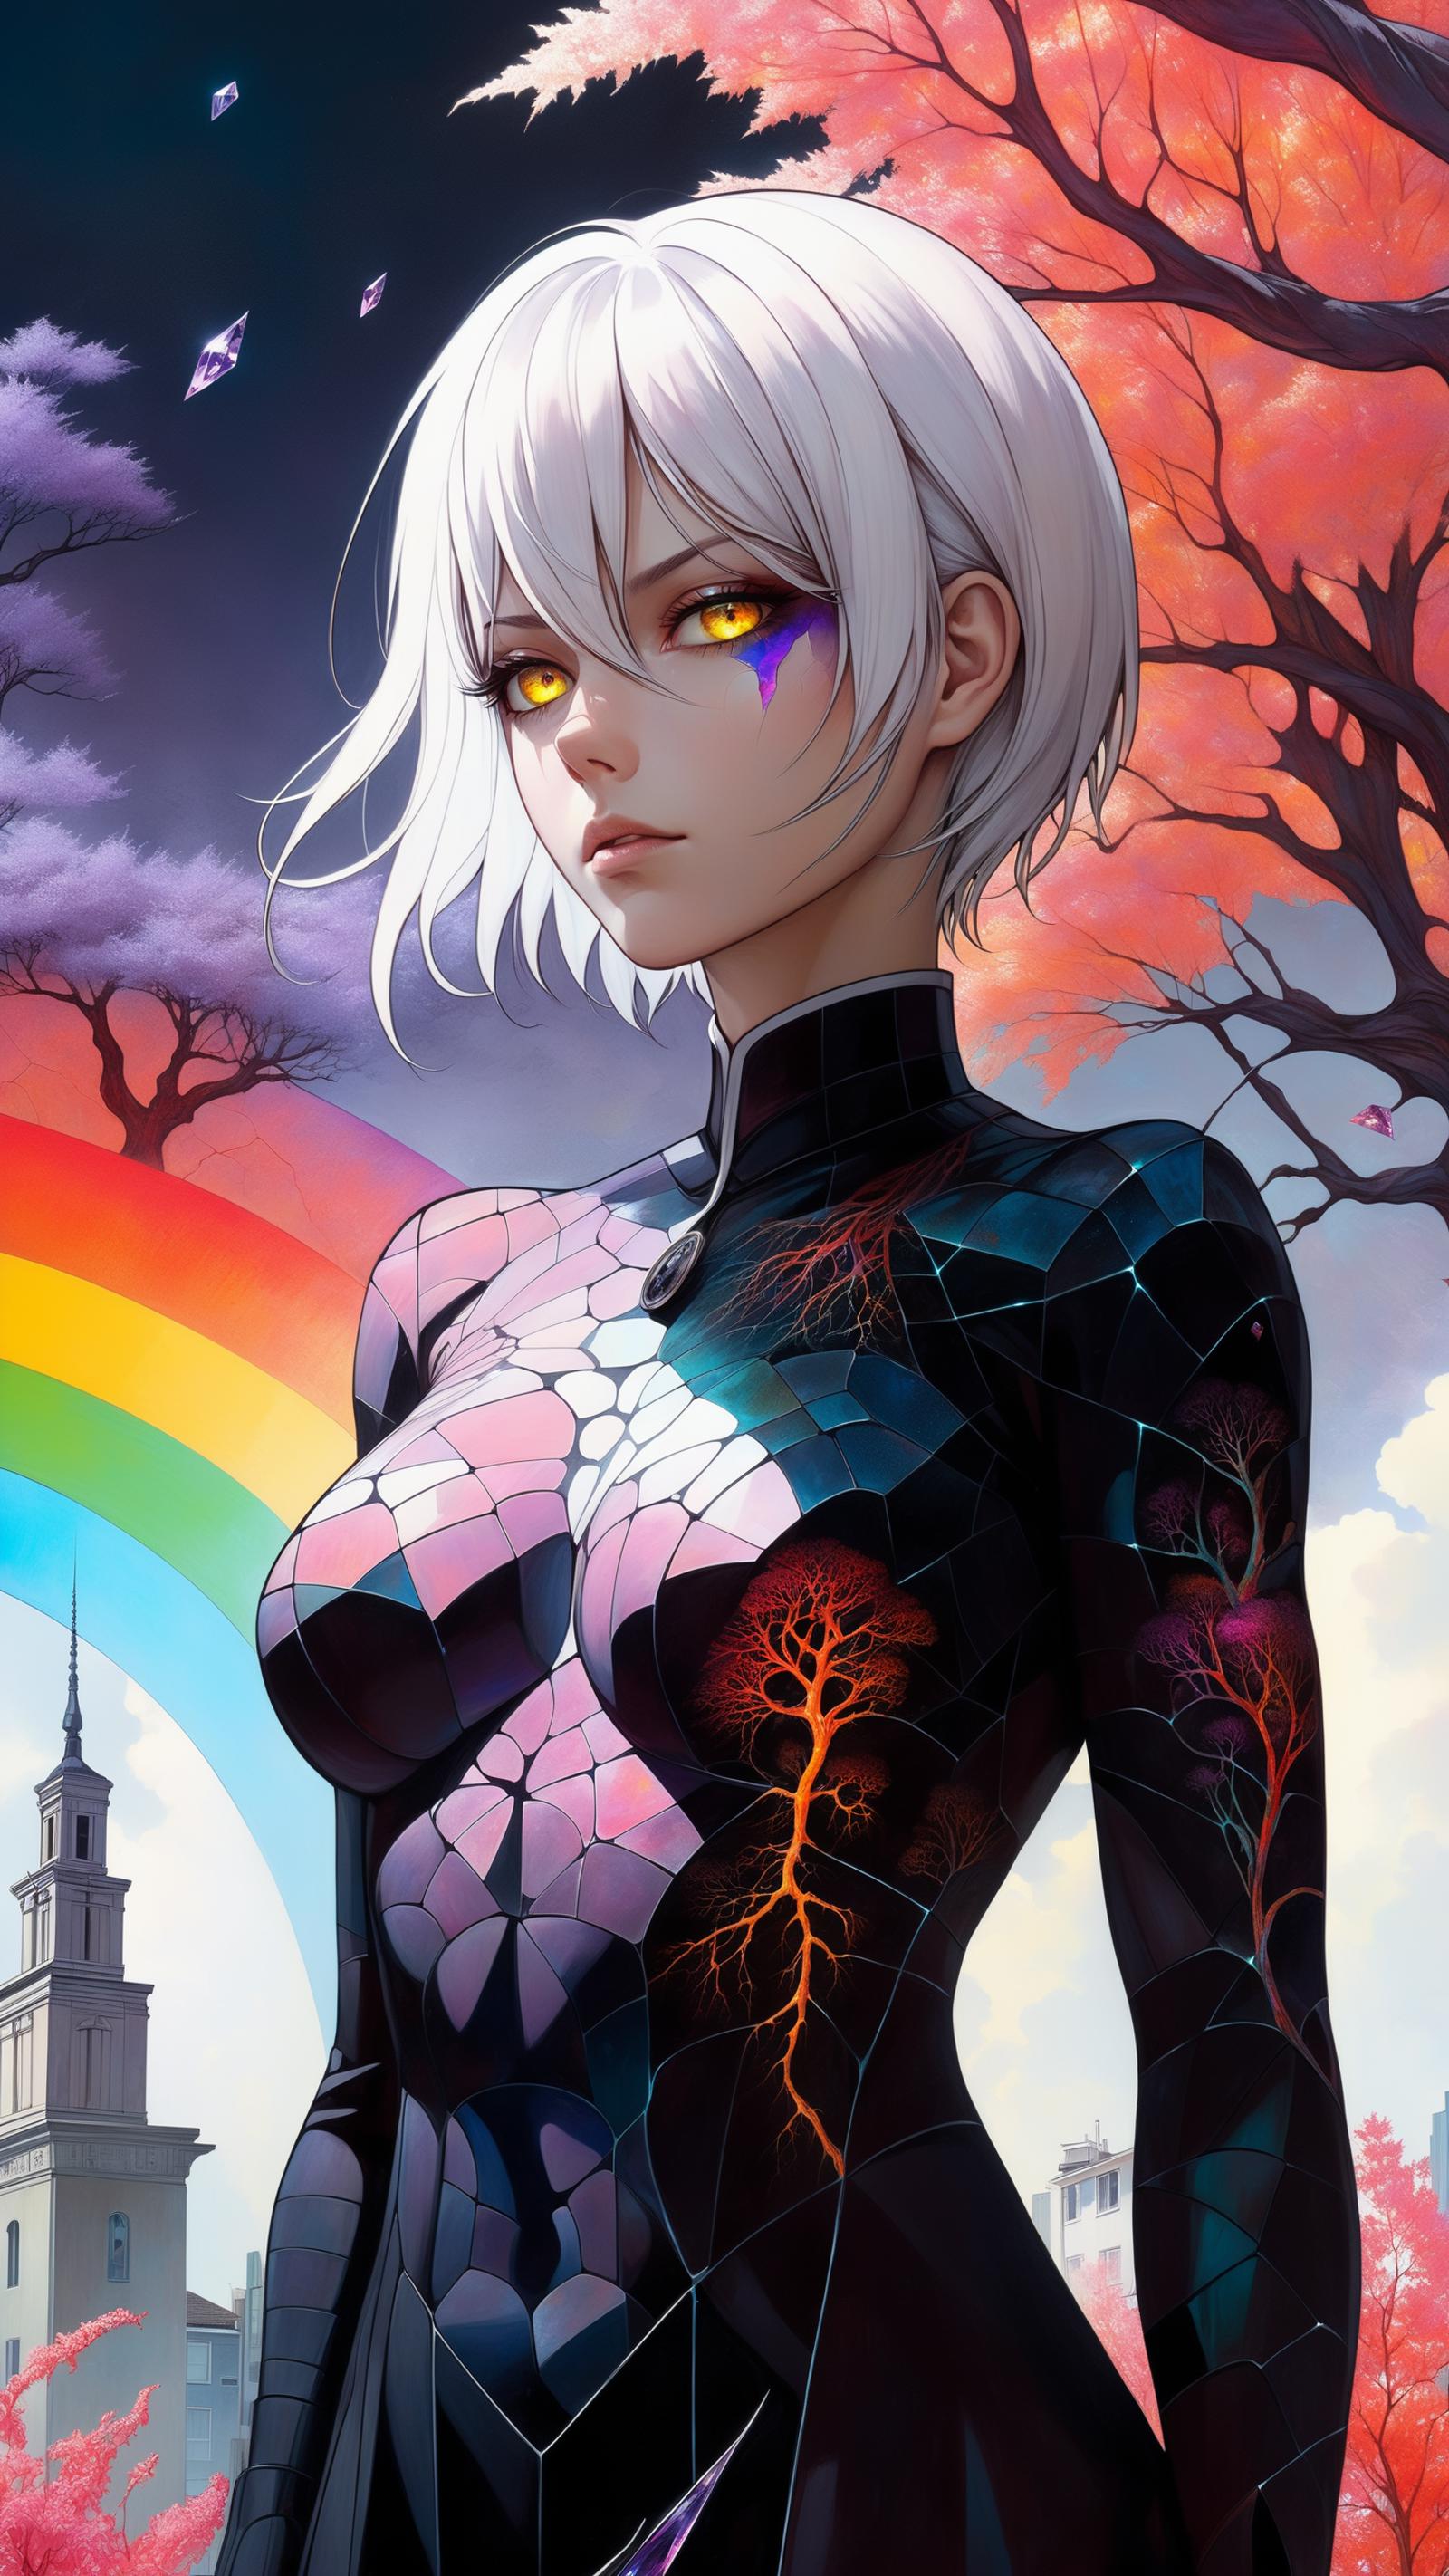 The image features a woman with white hair and purple eyes, dressed in a black and white outfit. She is standing in front of a rainbow, adding a vibrant touch to the scene. The woman is positioned under a tree, further enhancing the colorful and lively atmosphere of the image.